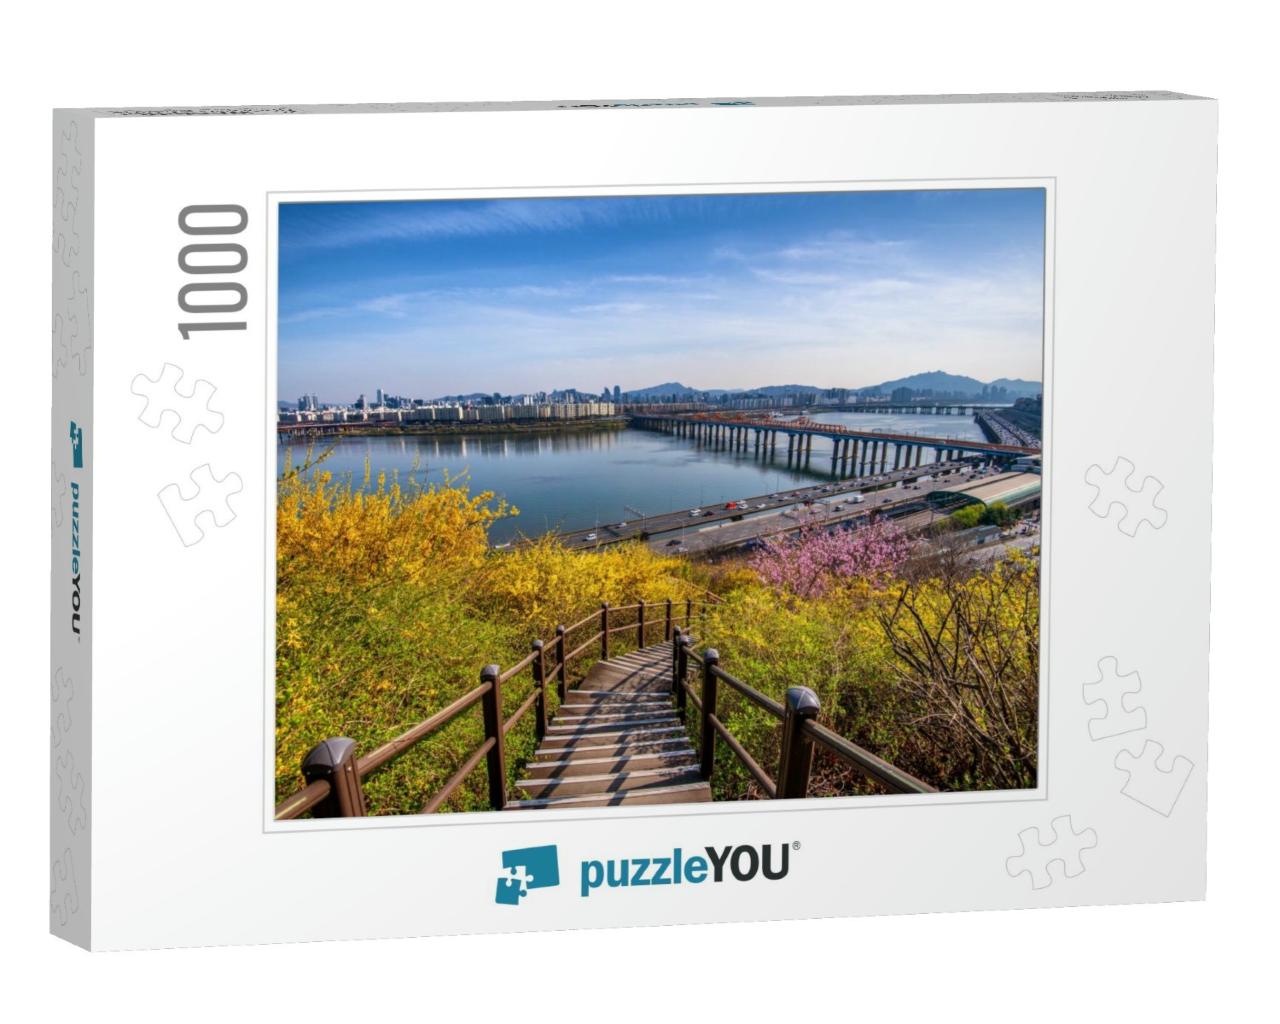 View of Han River in Seoul, South Korea... Jigsaw Puzzle with 1000 pieces